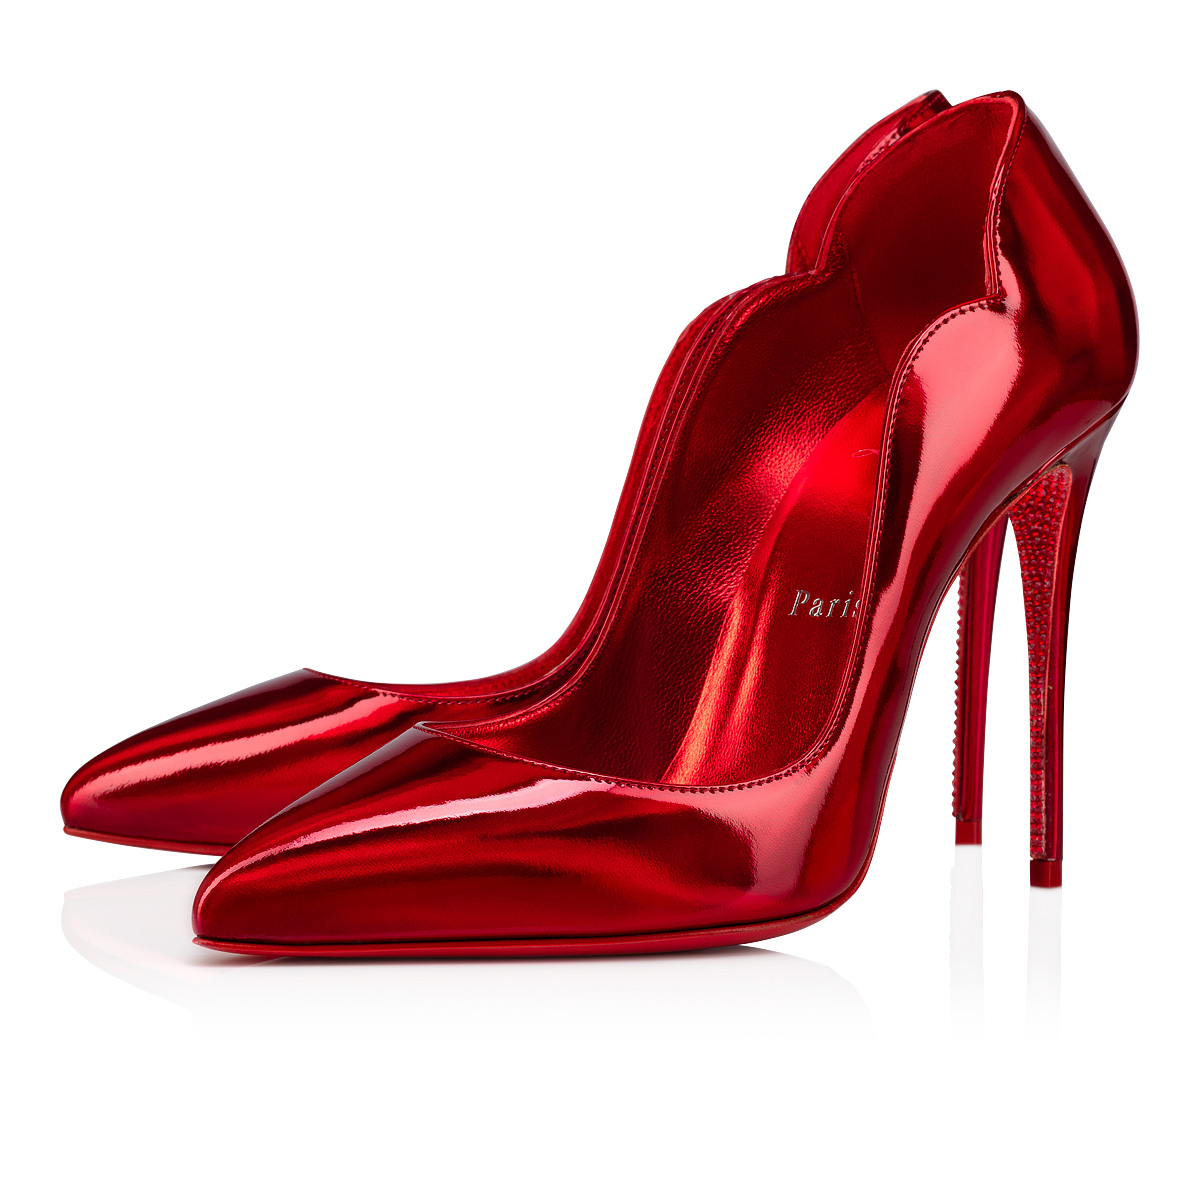 Long Heels, Red Bottoms: Louboutin are the Hottest Thing in